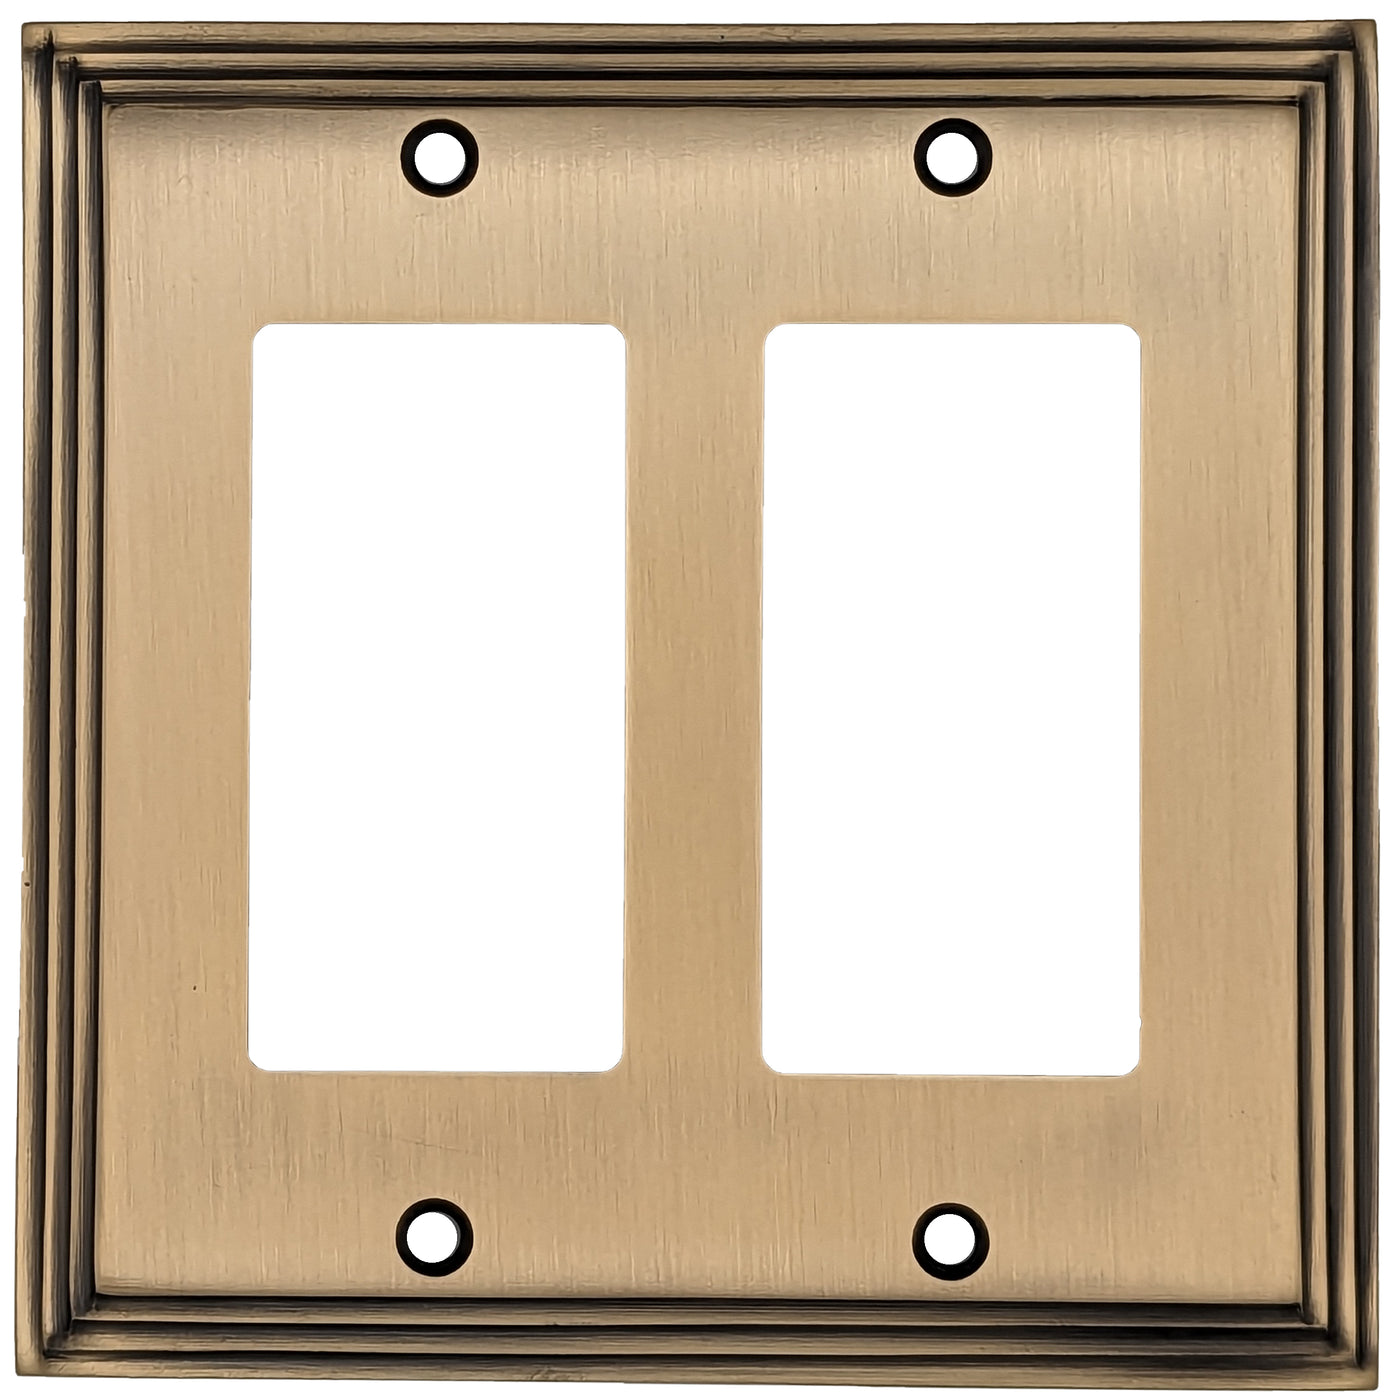 Kingston Classic Stepped Wall Plate (Antique Brass)